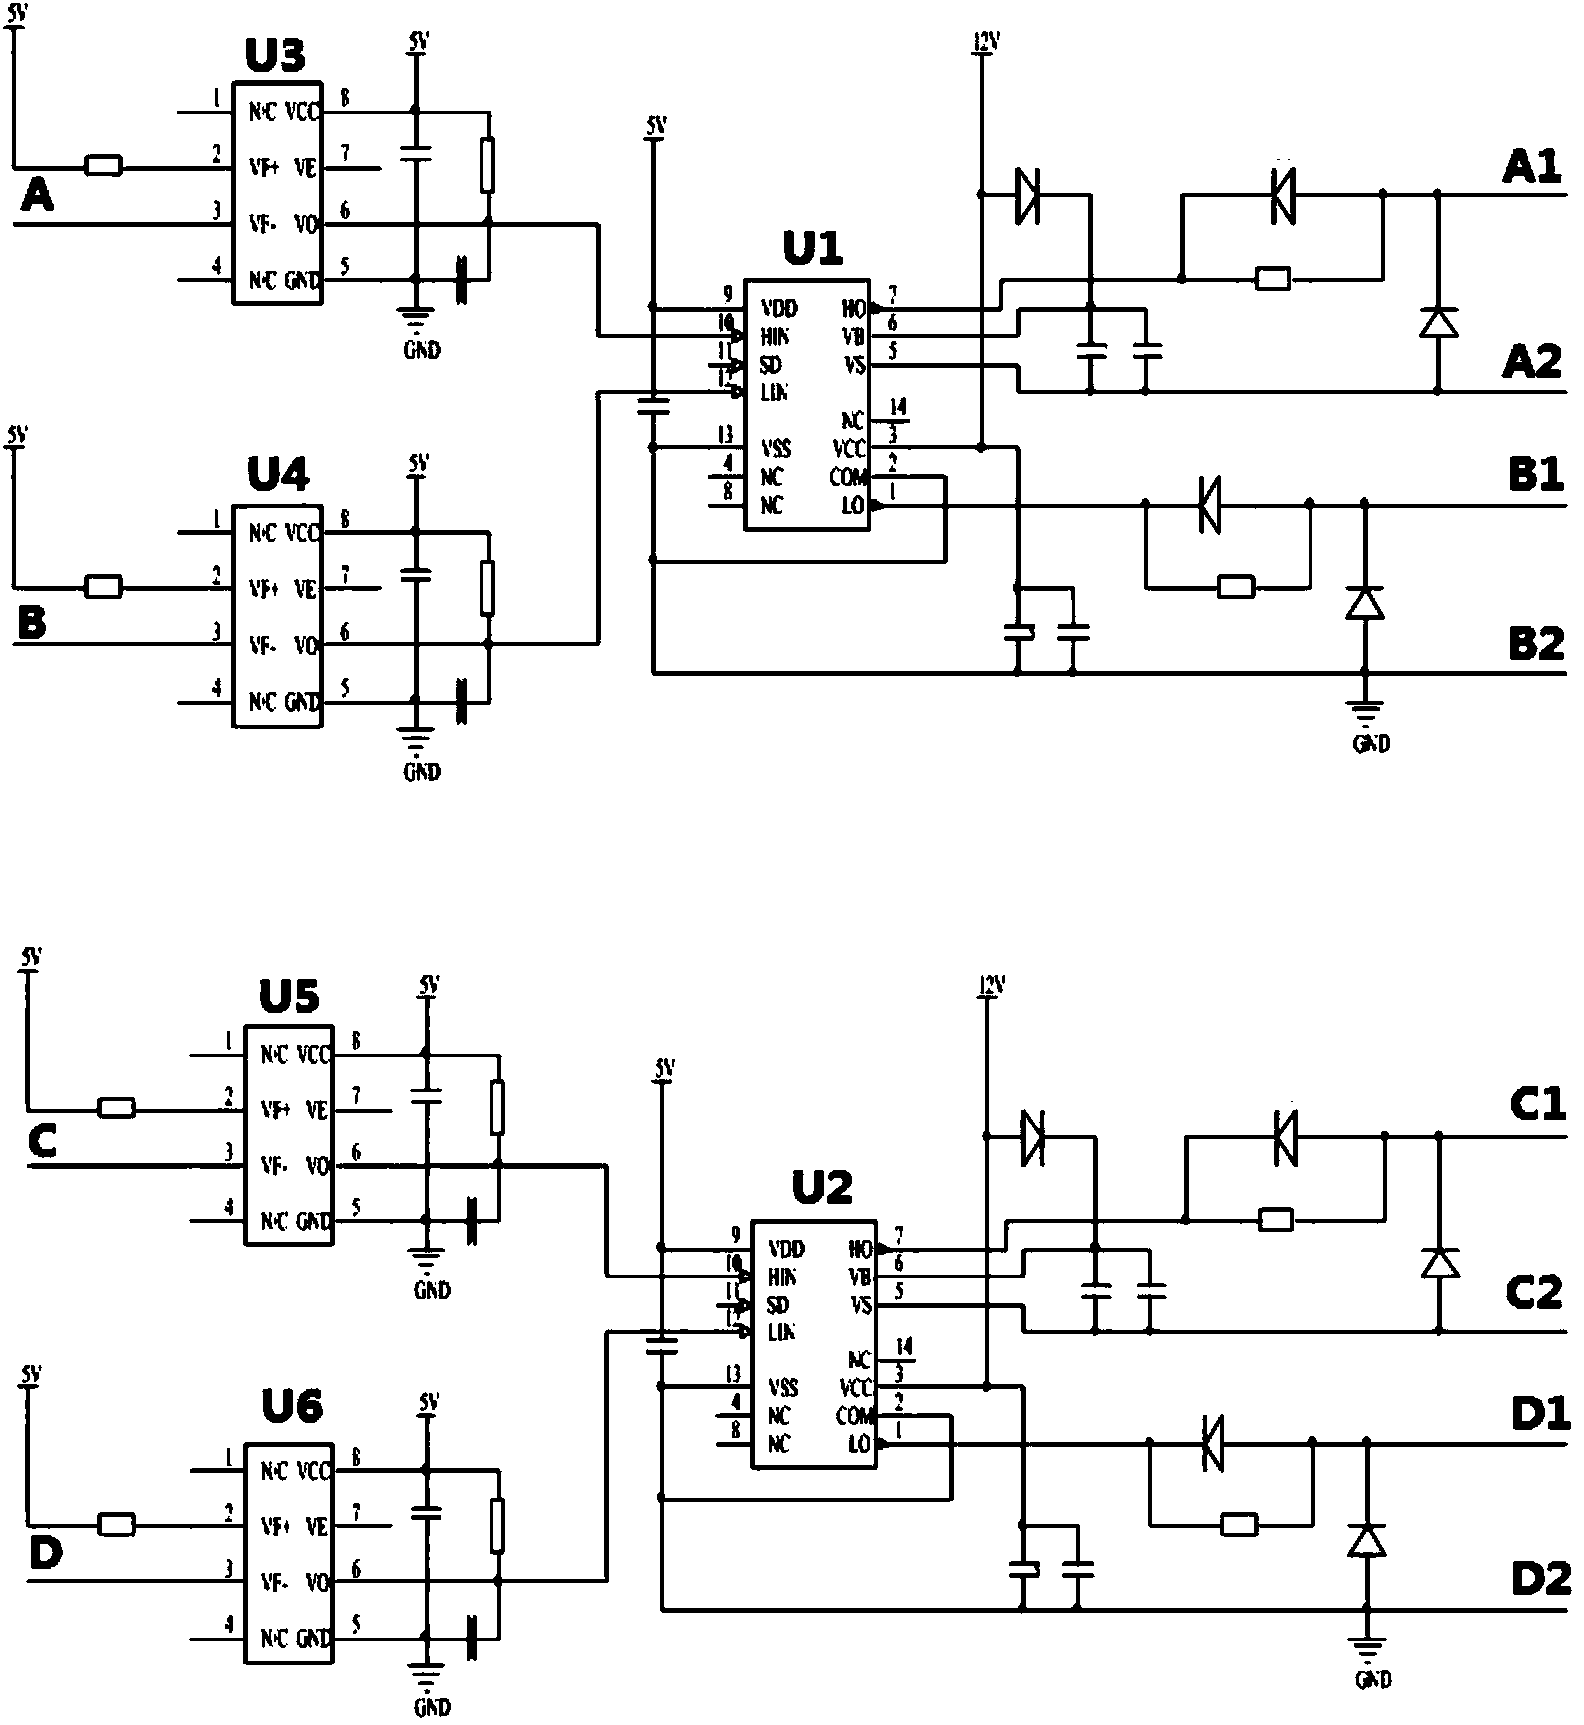 Photovoltaic system DC-DC full-bridge converter based on soft switching technology